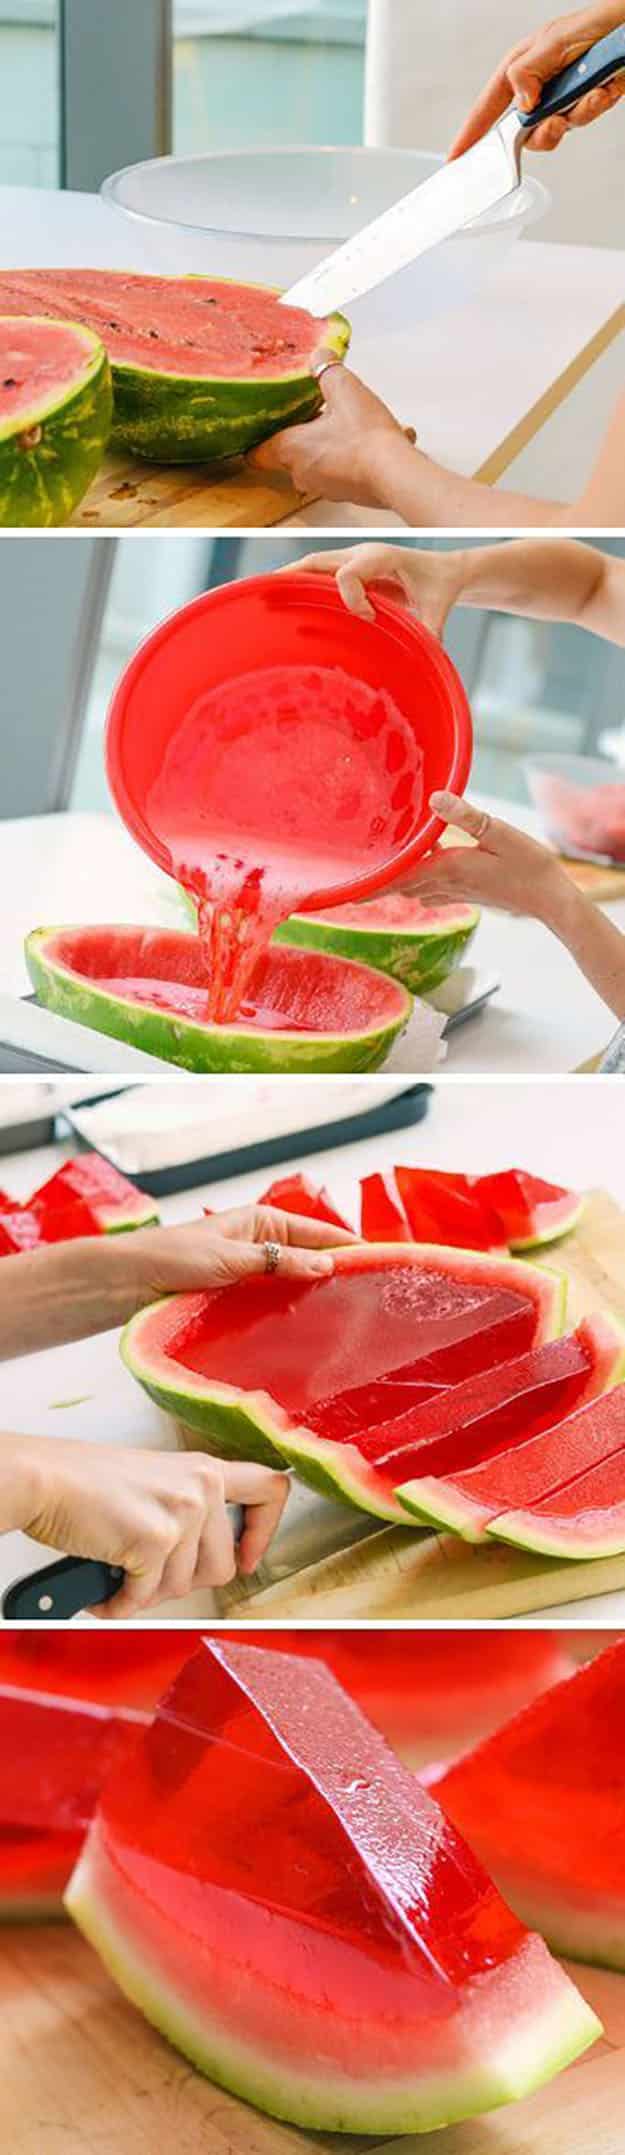 Easy Party Food Ideas | Make Ahead Cocktails | Watermelon Jello Shot Recipe | DIY Projects & Crafts by DIY JOY #appetizers #partyfood #recipes